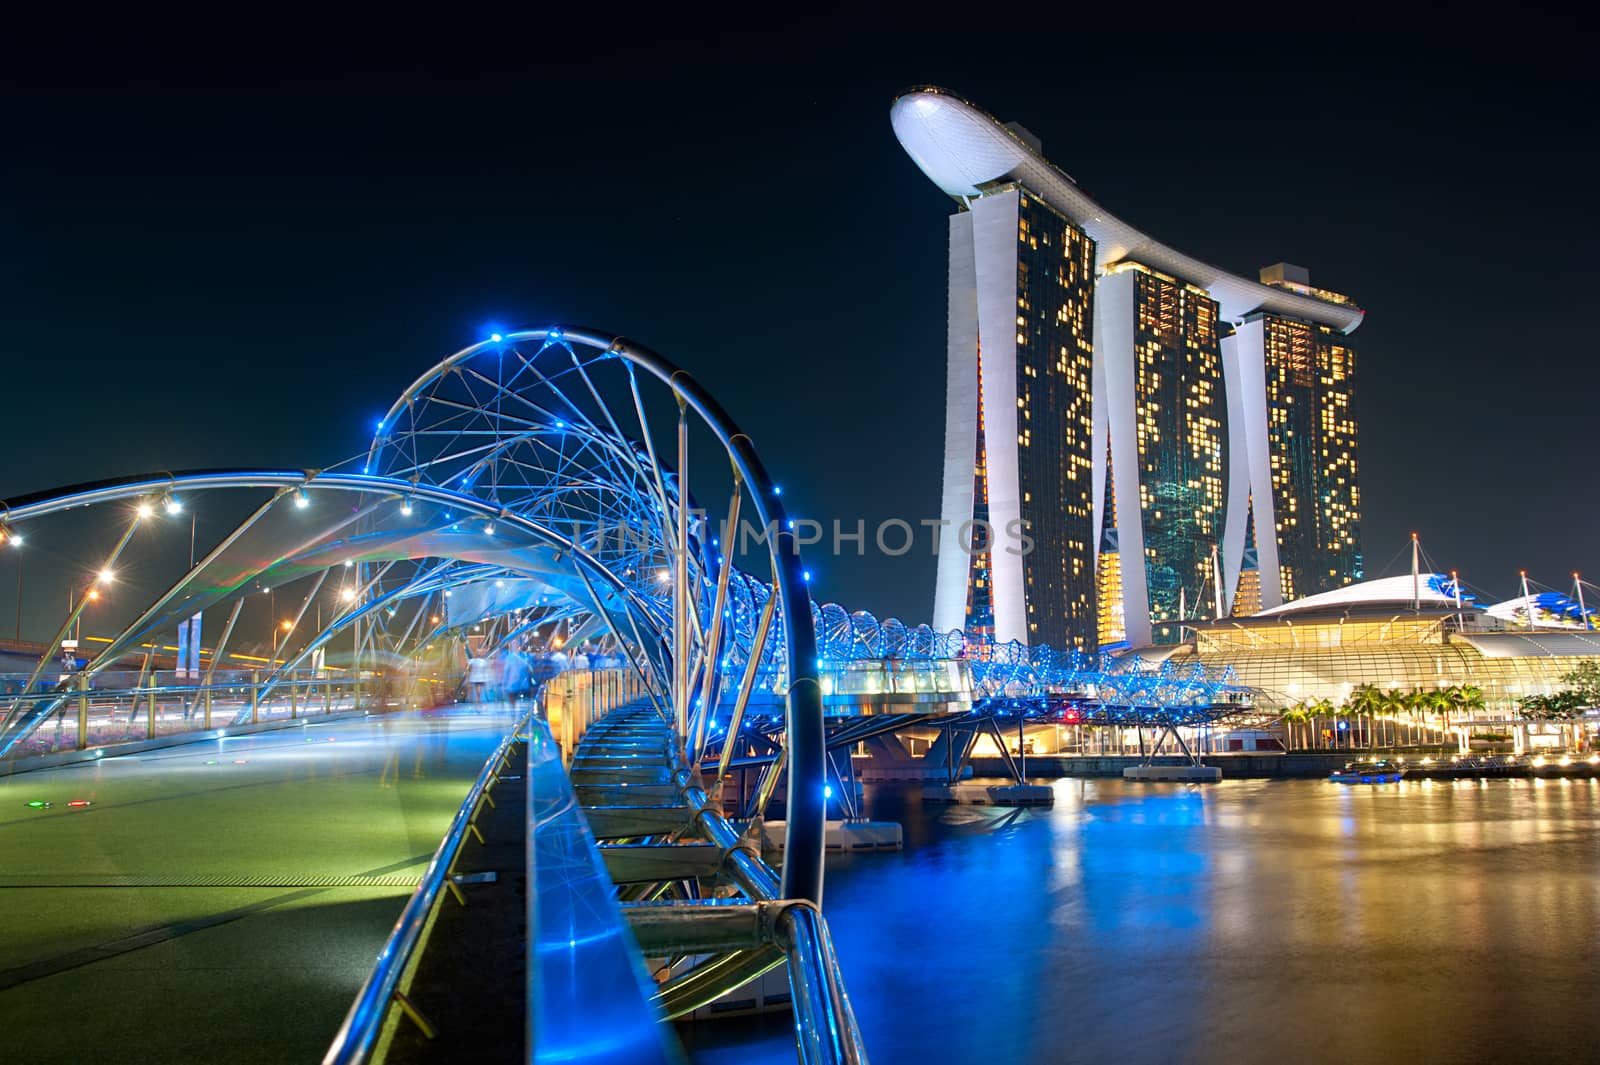 The Helix Bridge and Marina Bay Sands in Singapore. The Helix is fabricated from 650 tonnes of Duplex Stainless Steel and 1000 tonnes of carbon steel.